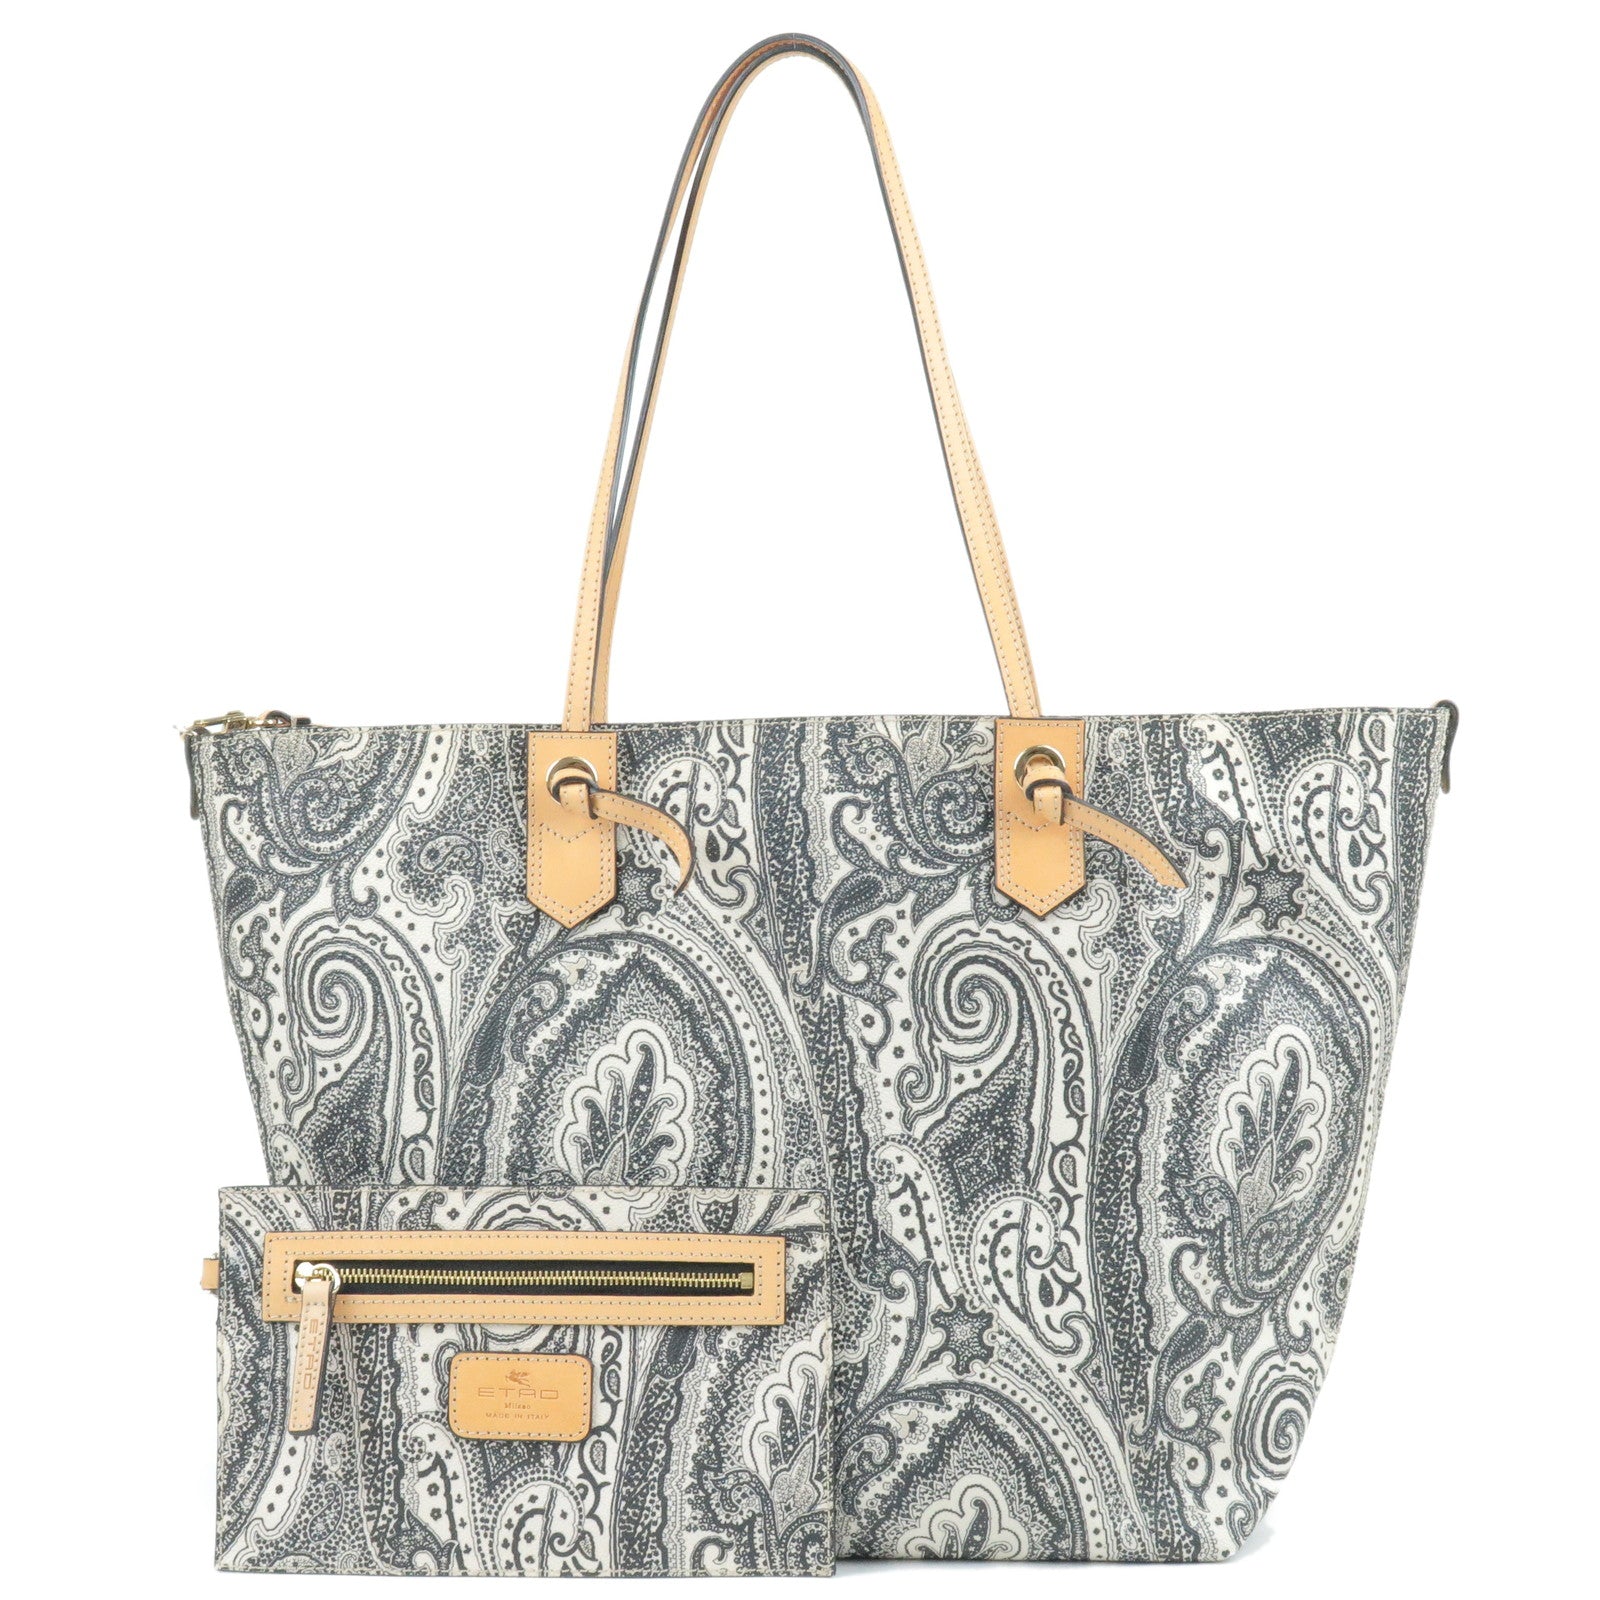 Paisley - Black - Afends Tito Tote bag Blanc - ep_vintage luxury Store -  Leather - Print - PVC - Tote - ETRO - Bag - Hand - Bag - White – dct